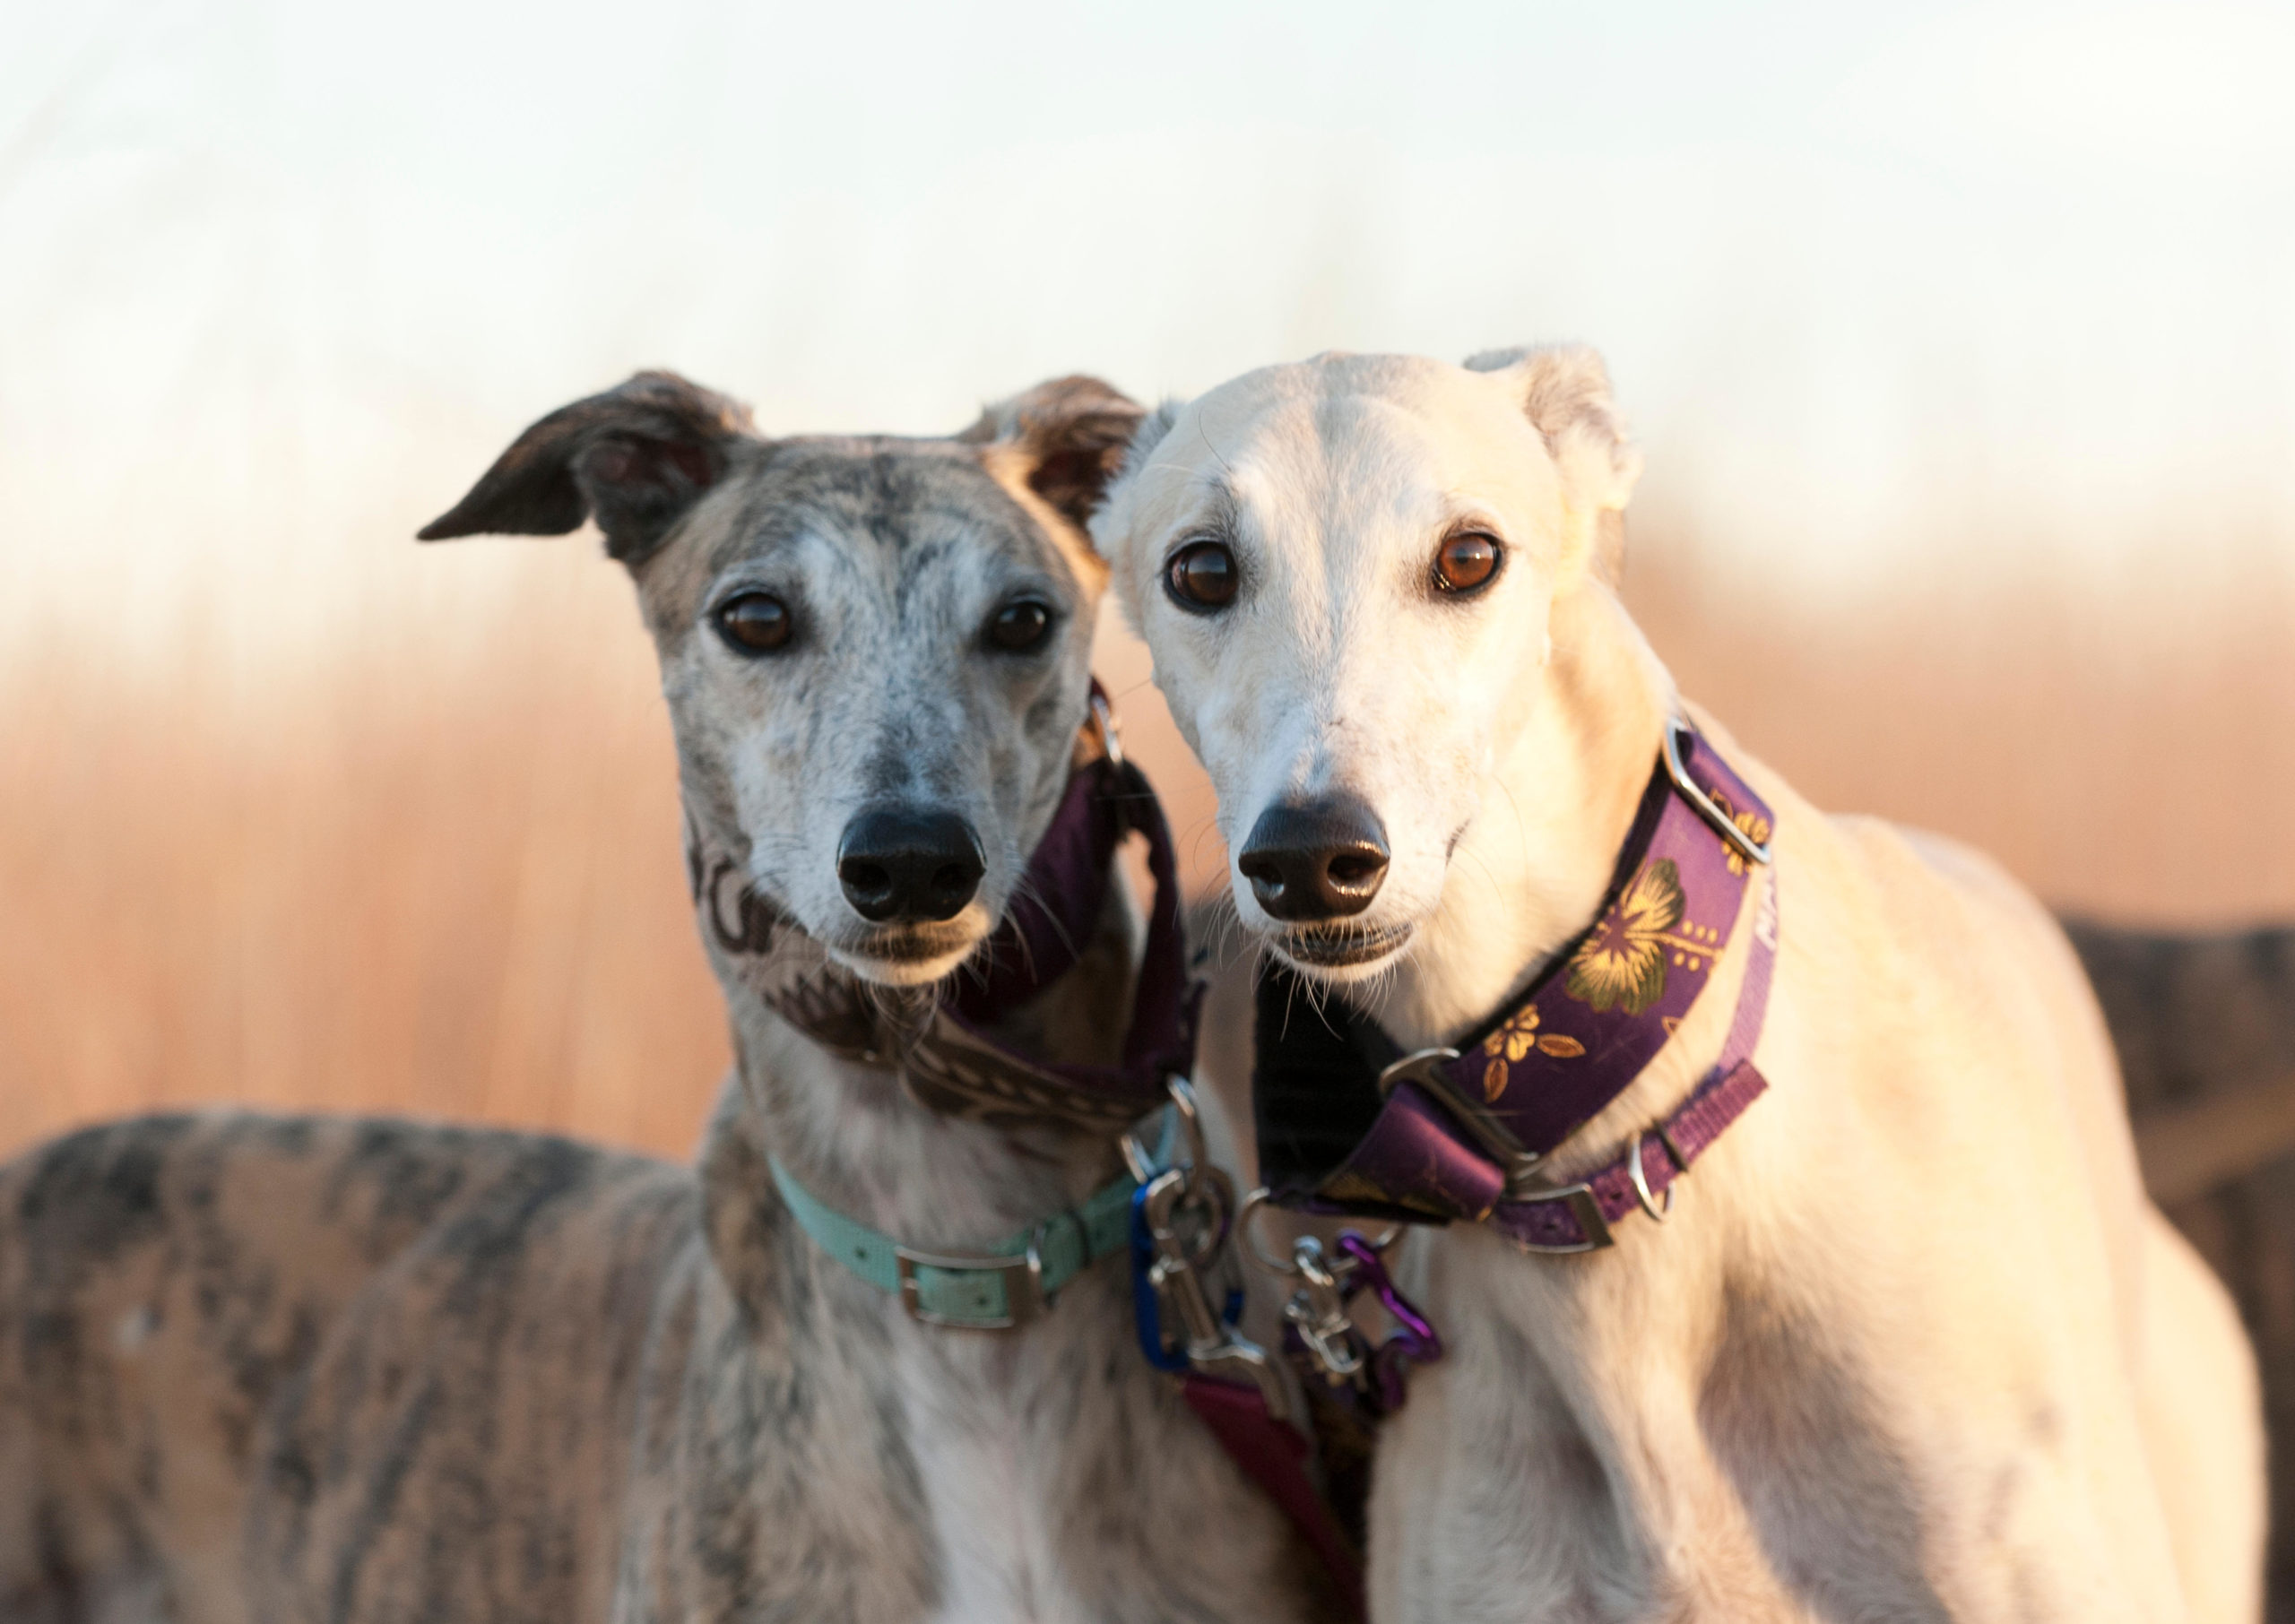 What happens to greyhounds after racing?